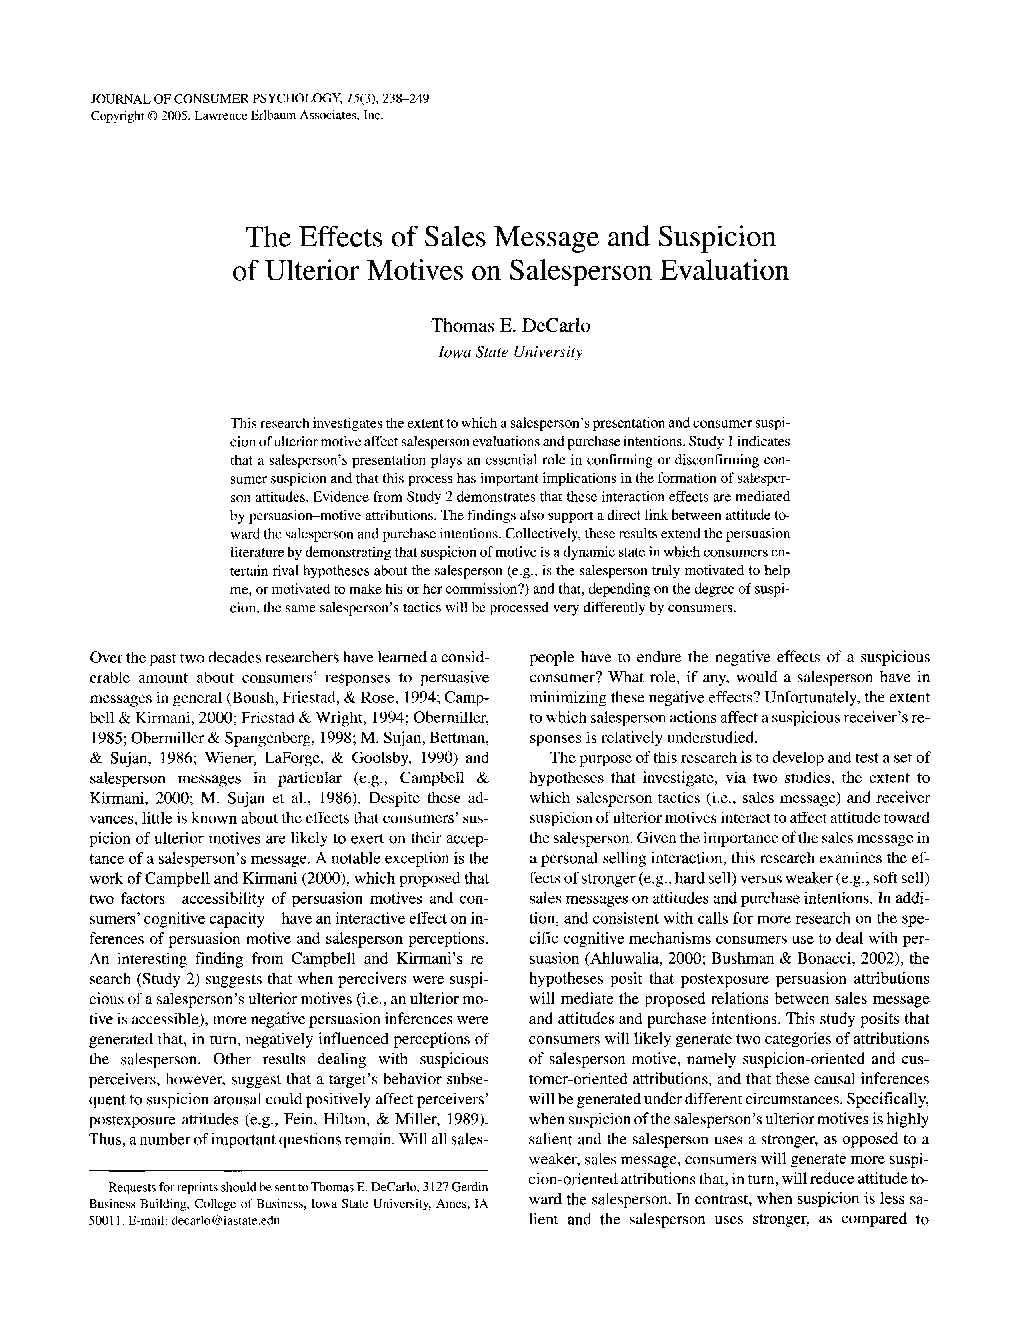 The Effects of Sales Message and Suspicion of Ulterior Motives on Salesperson Evaluation